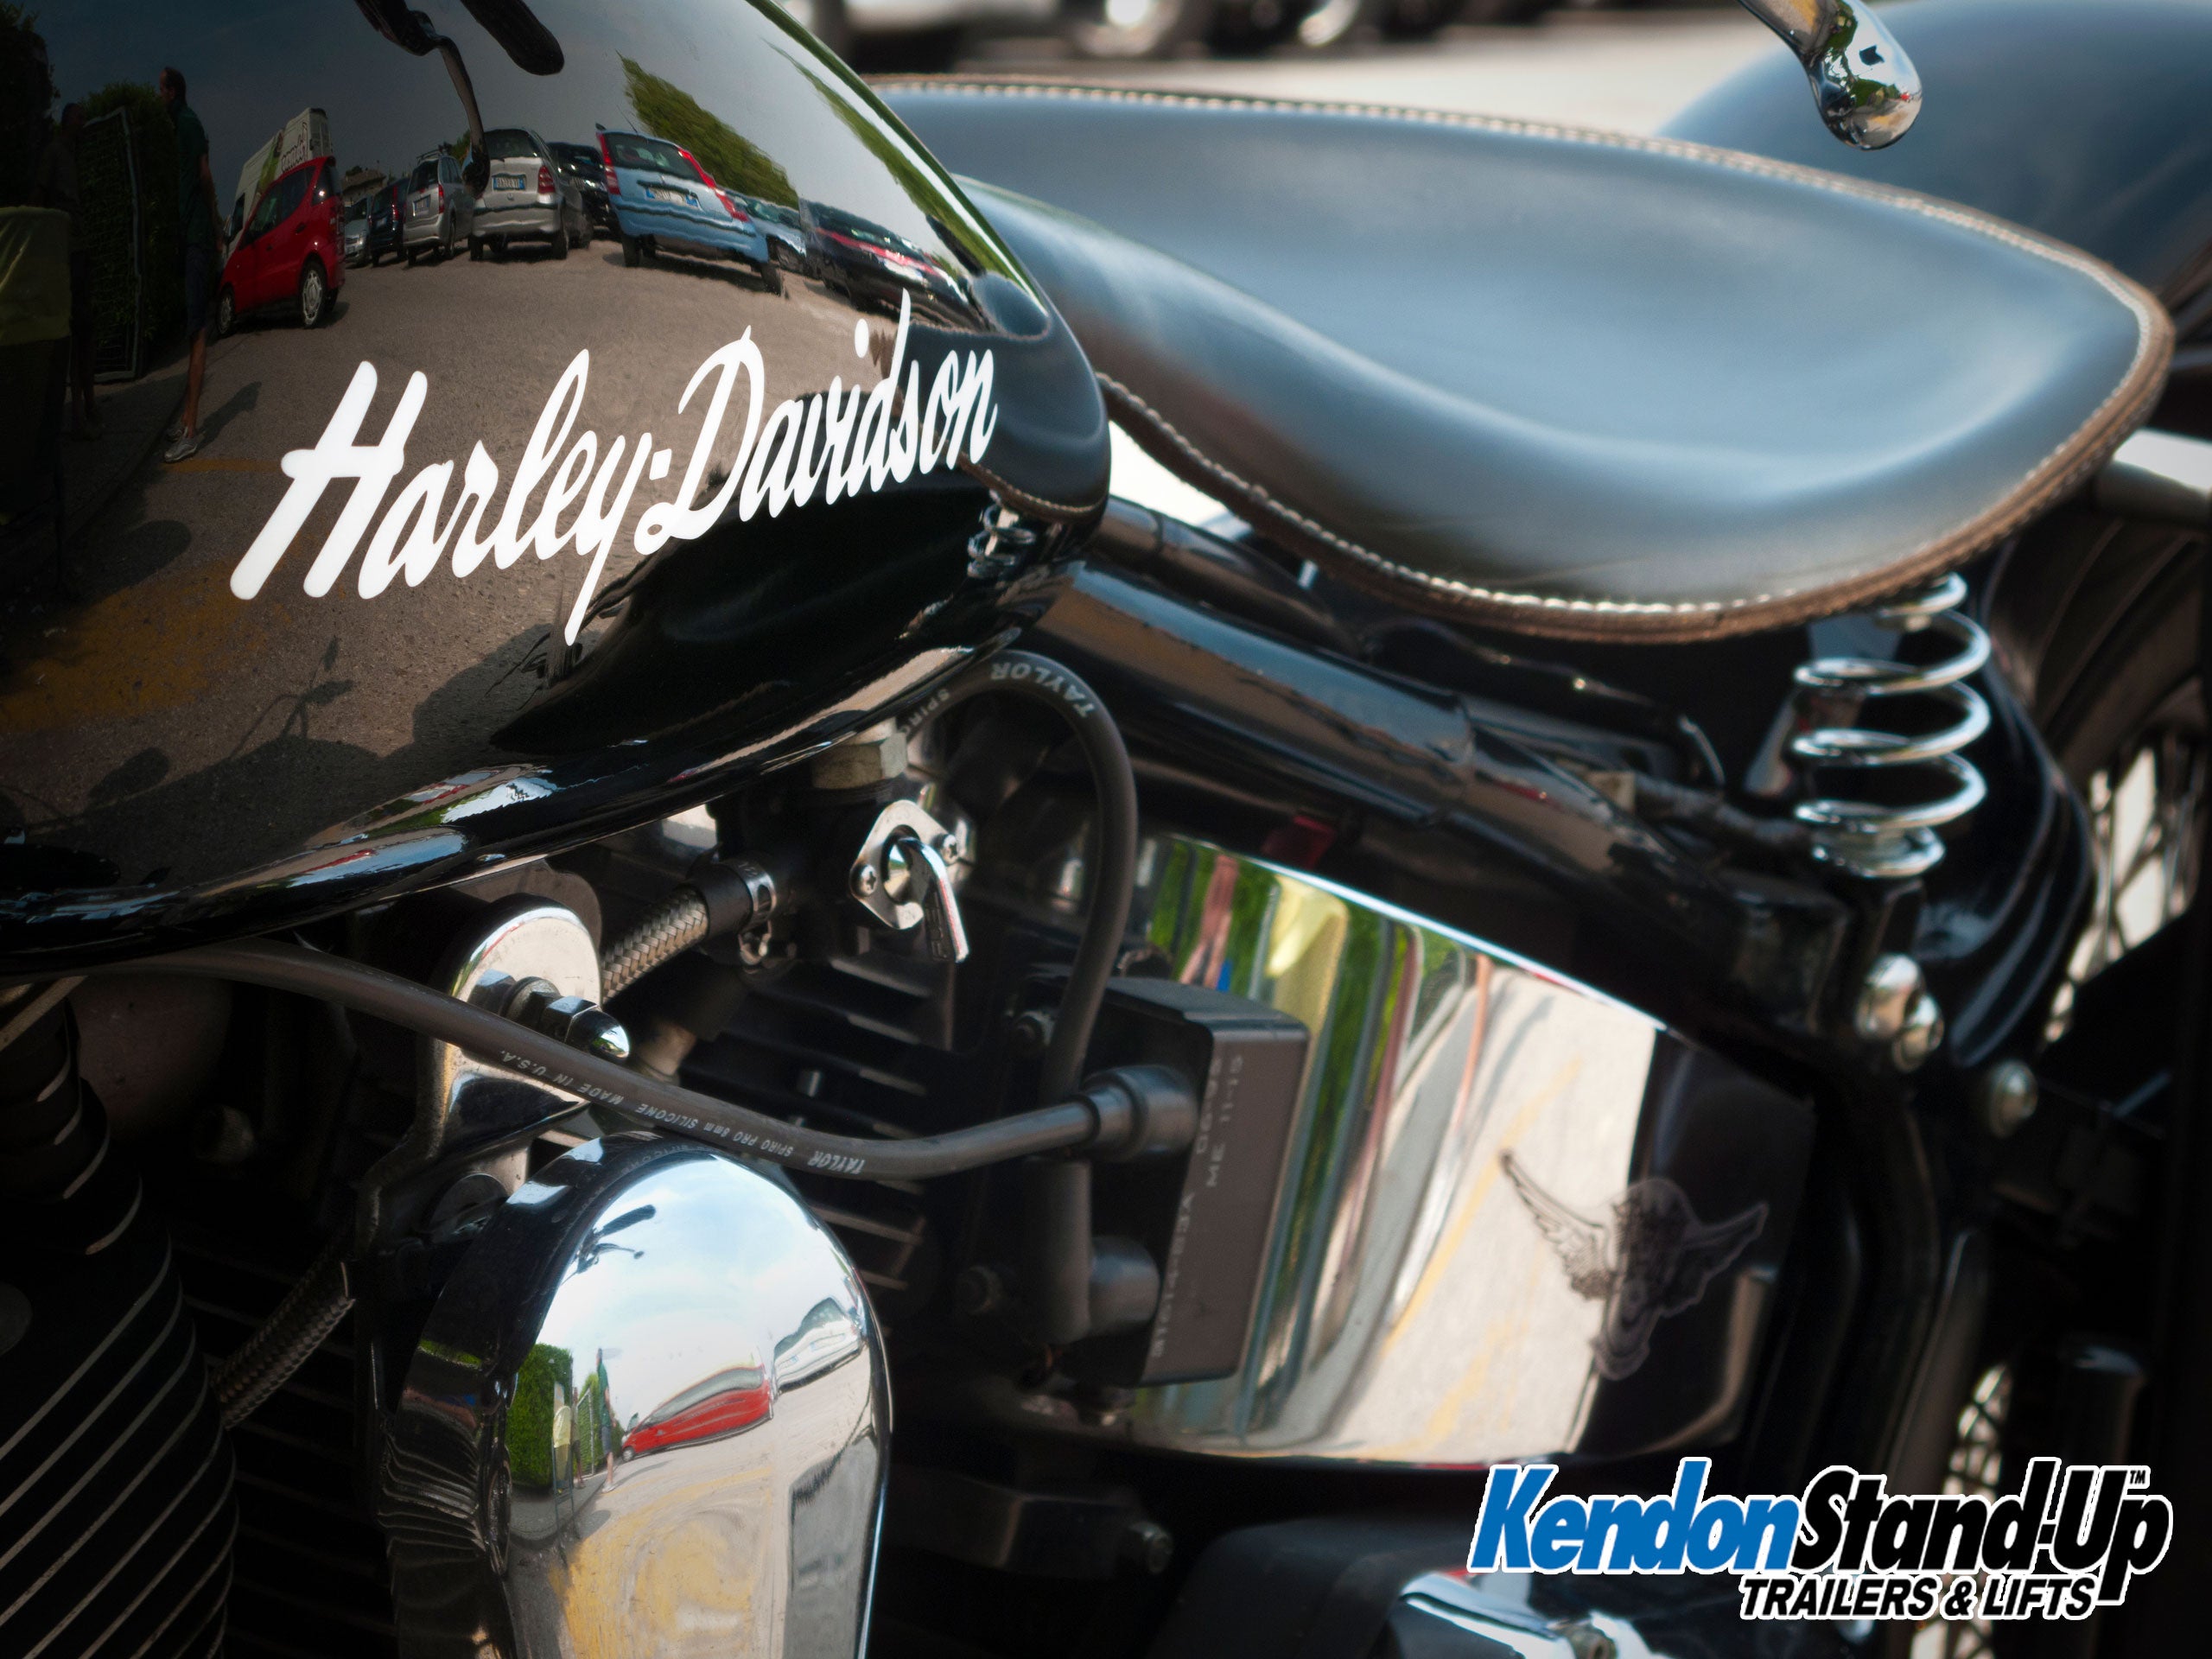 Advantages of Using a Kendon Trailer with Your Harley Davidson